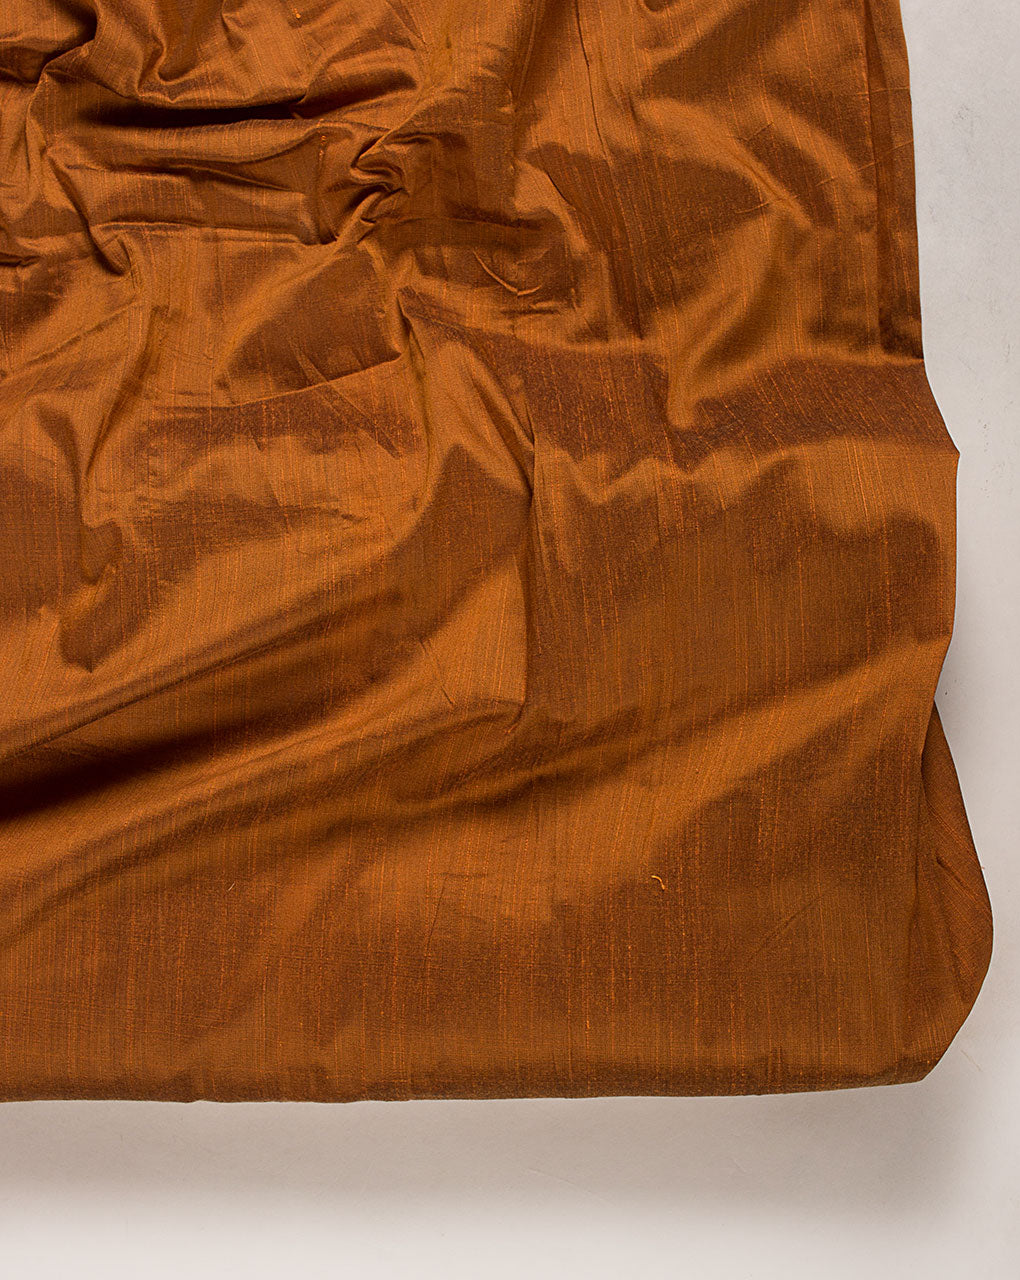 Brown Woven Poly Viscose Fabric